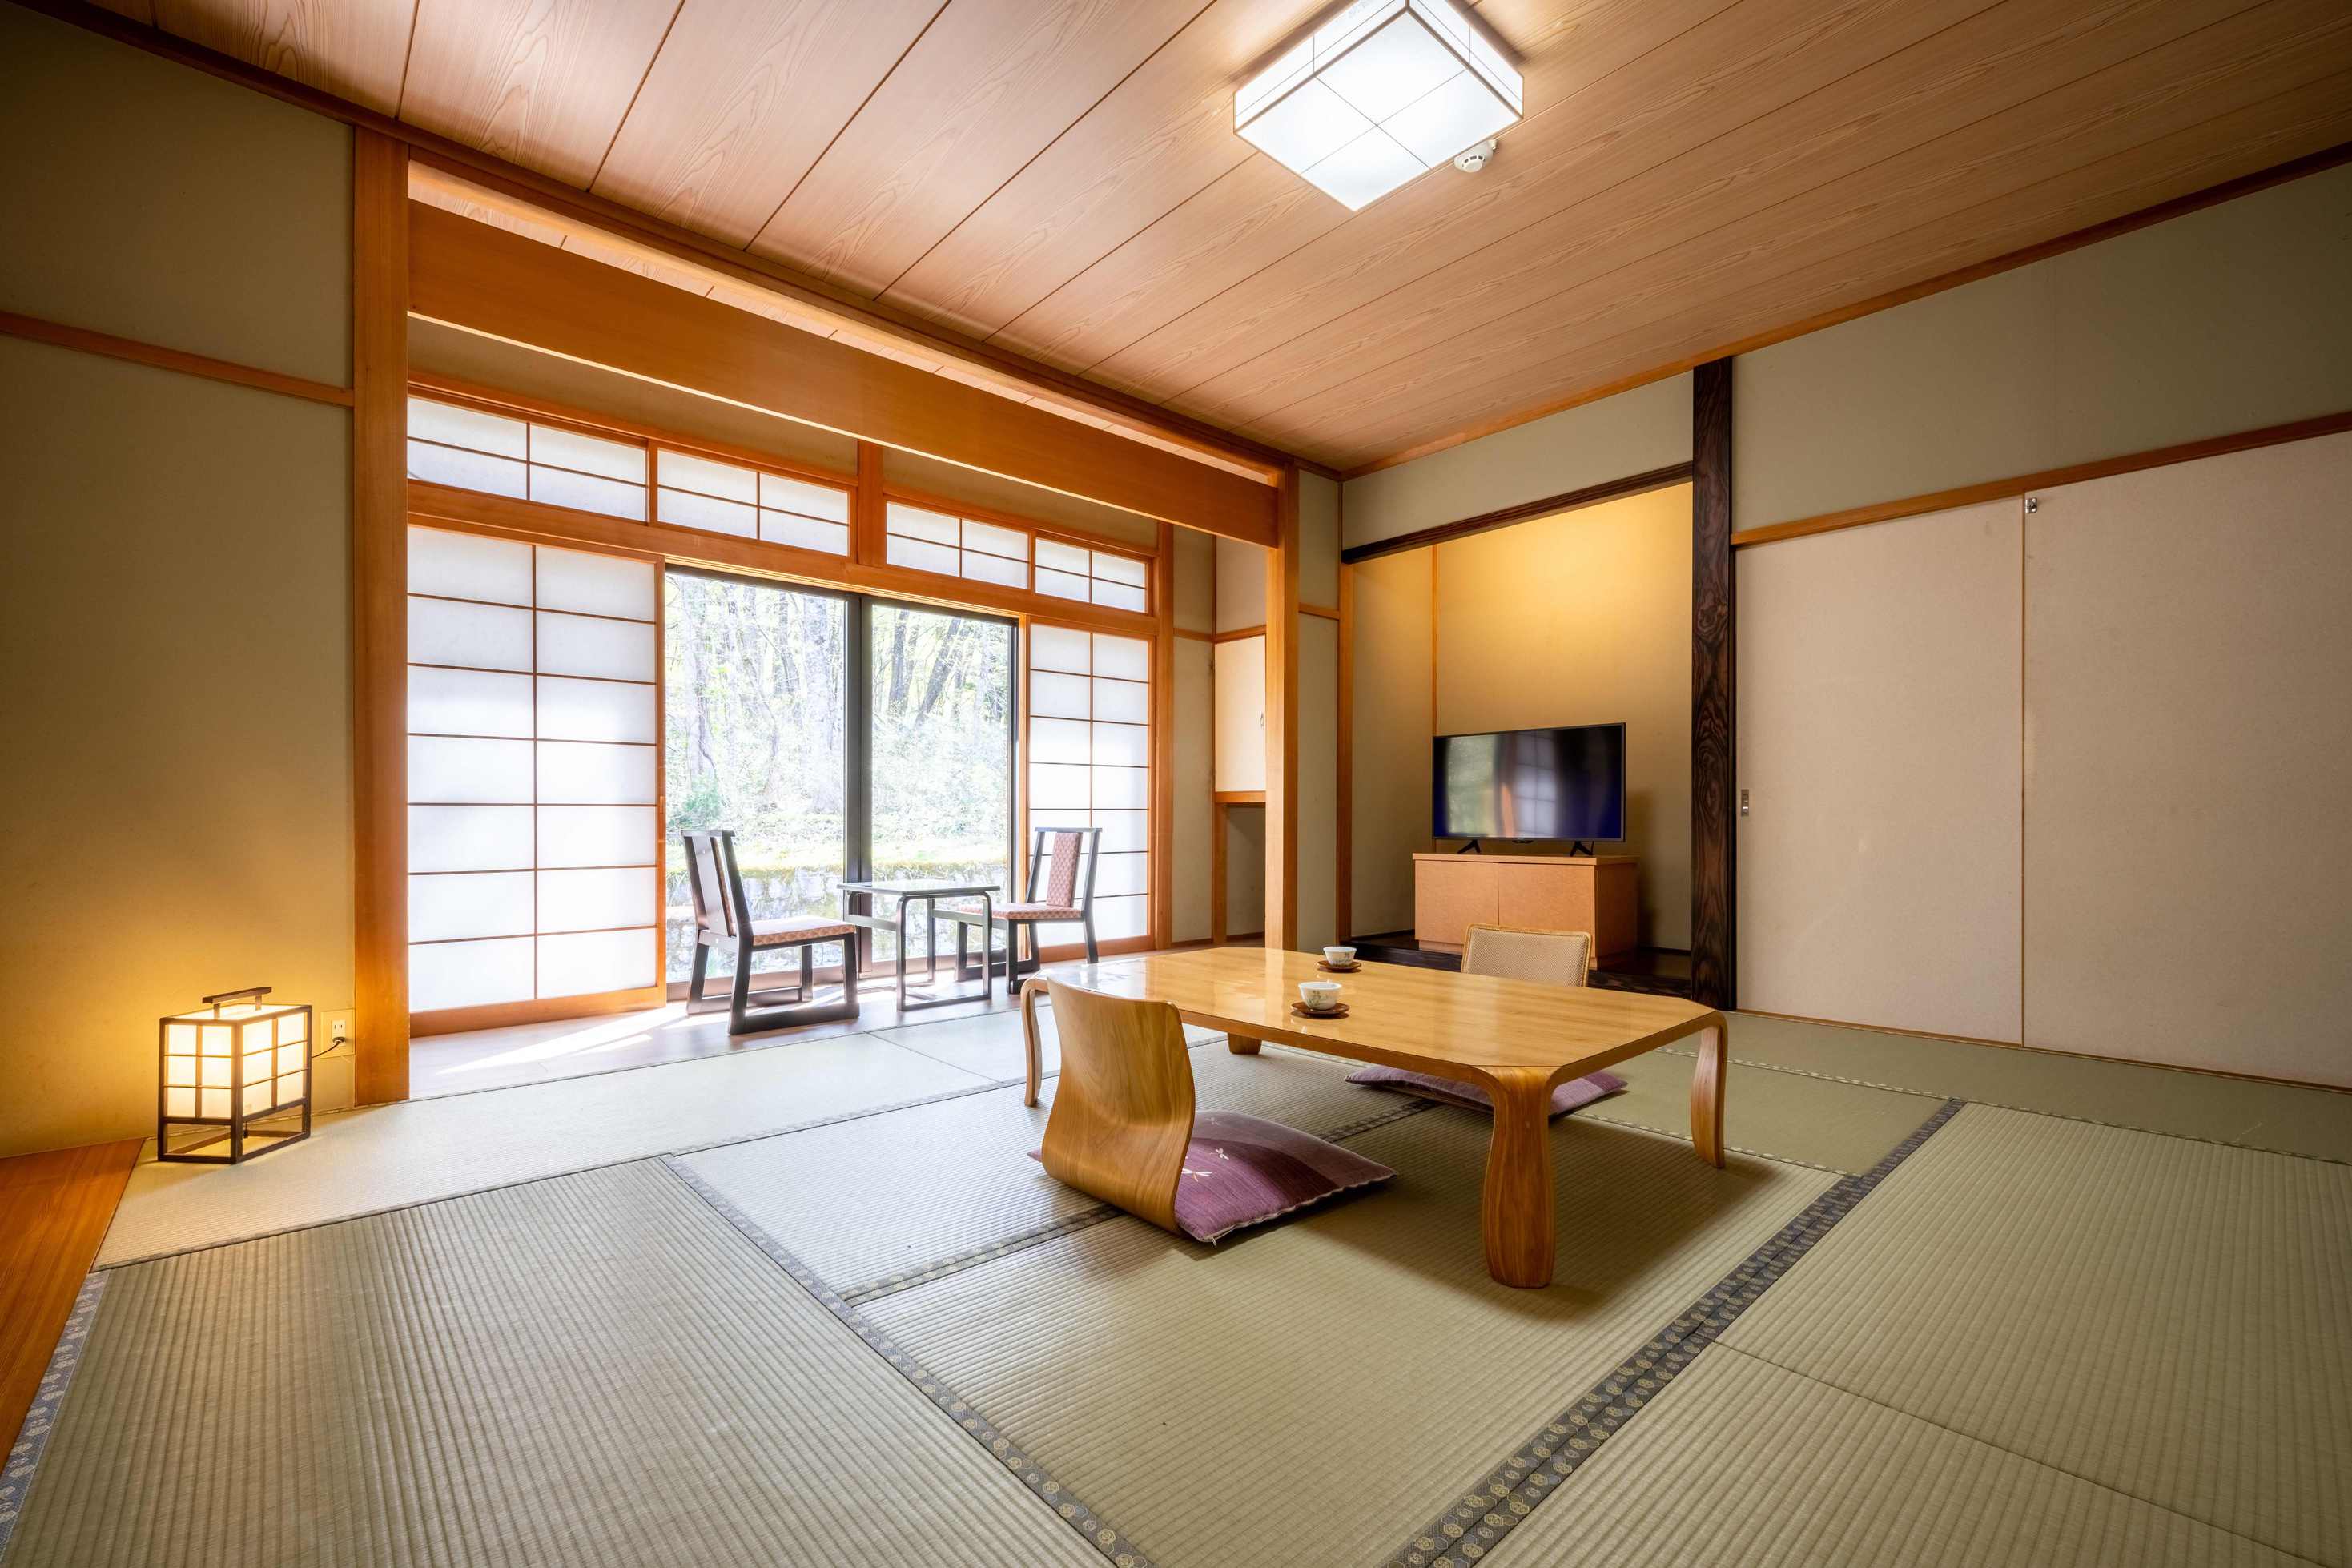 Yakeishi Dake Onsen Yakeishi Kur Park Himekayu Yakeishi Dake Onsen Yakeishi Kur Park Himekayu is perfectly located for both business and leisure guests in Oshu. Offering a variety of facilities and services, the property provides all you need for 